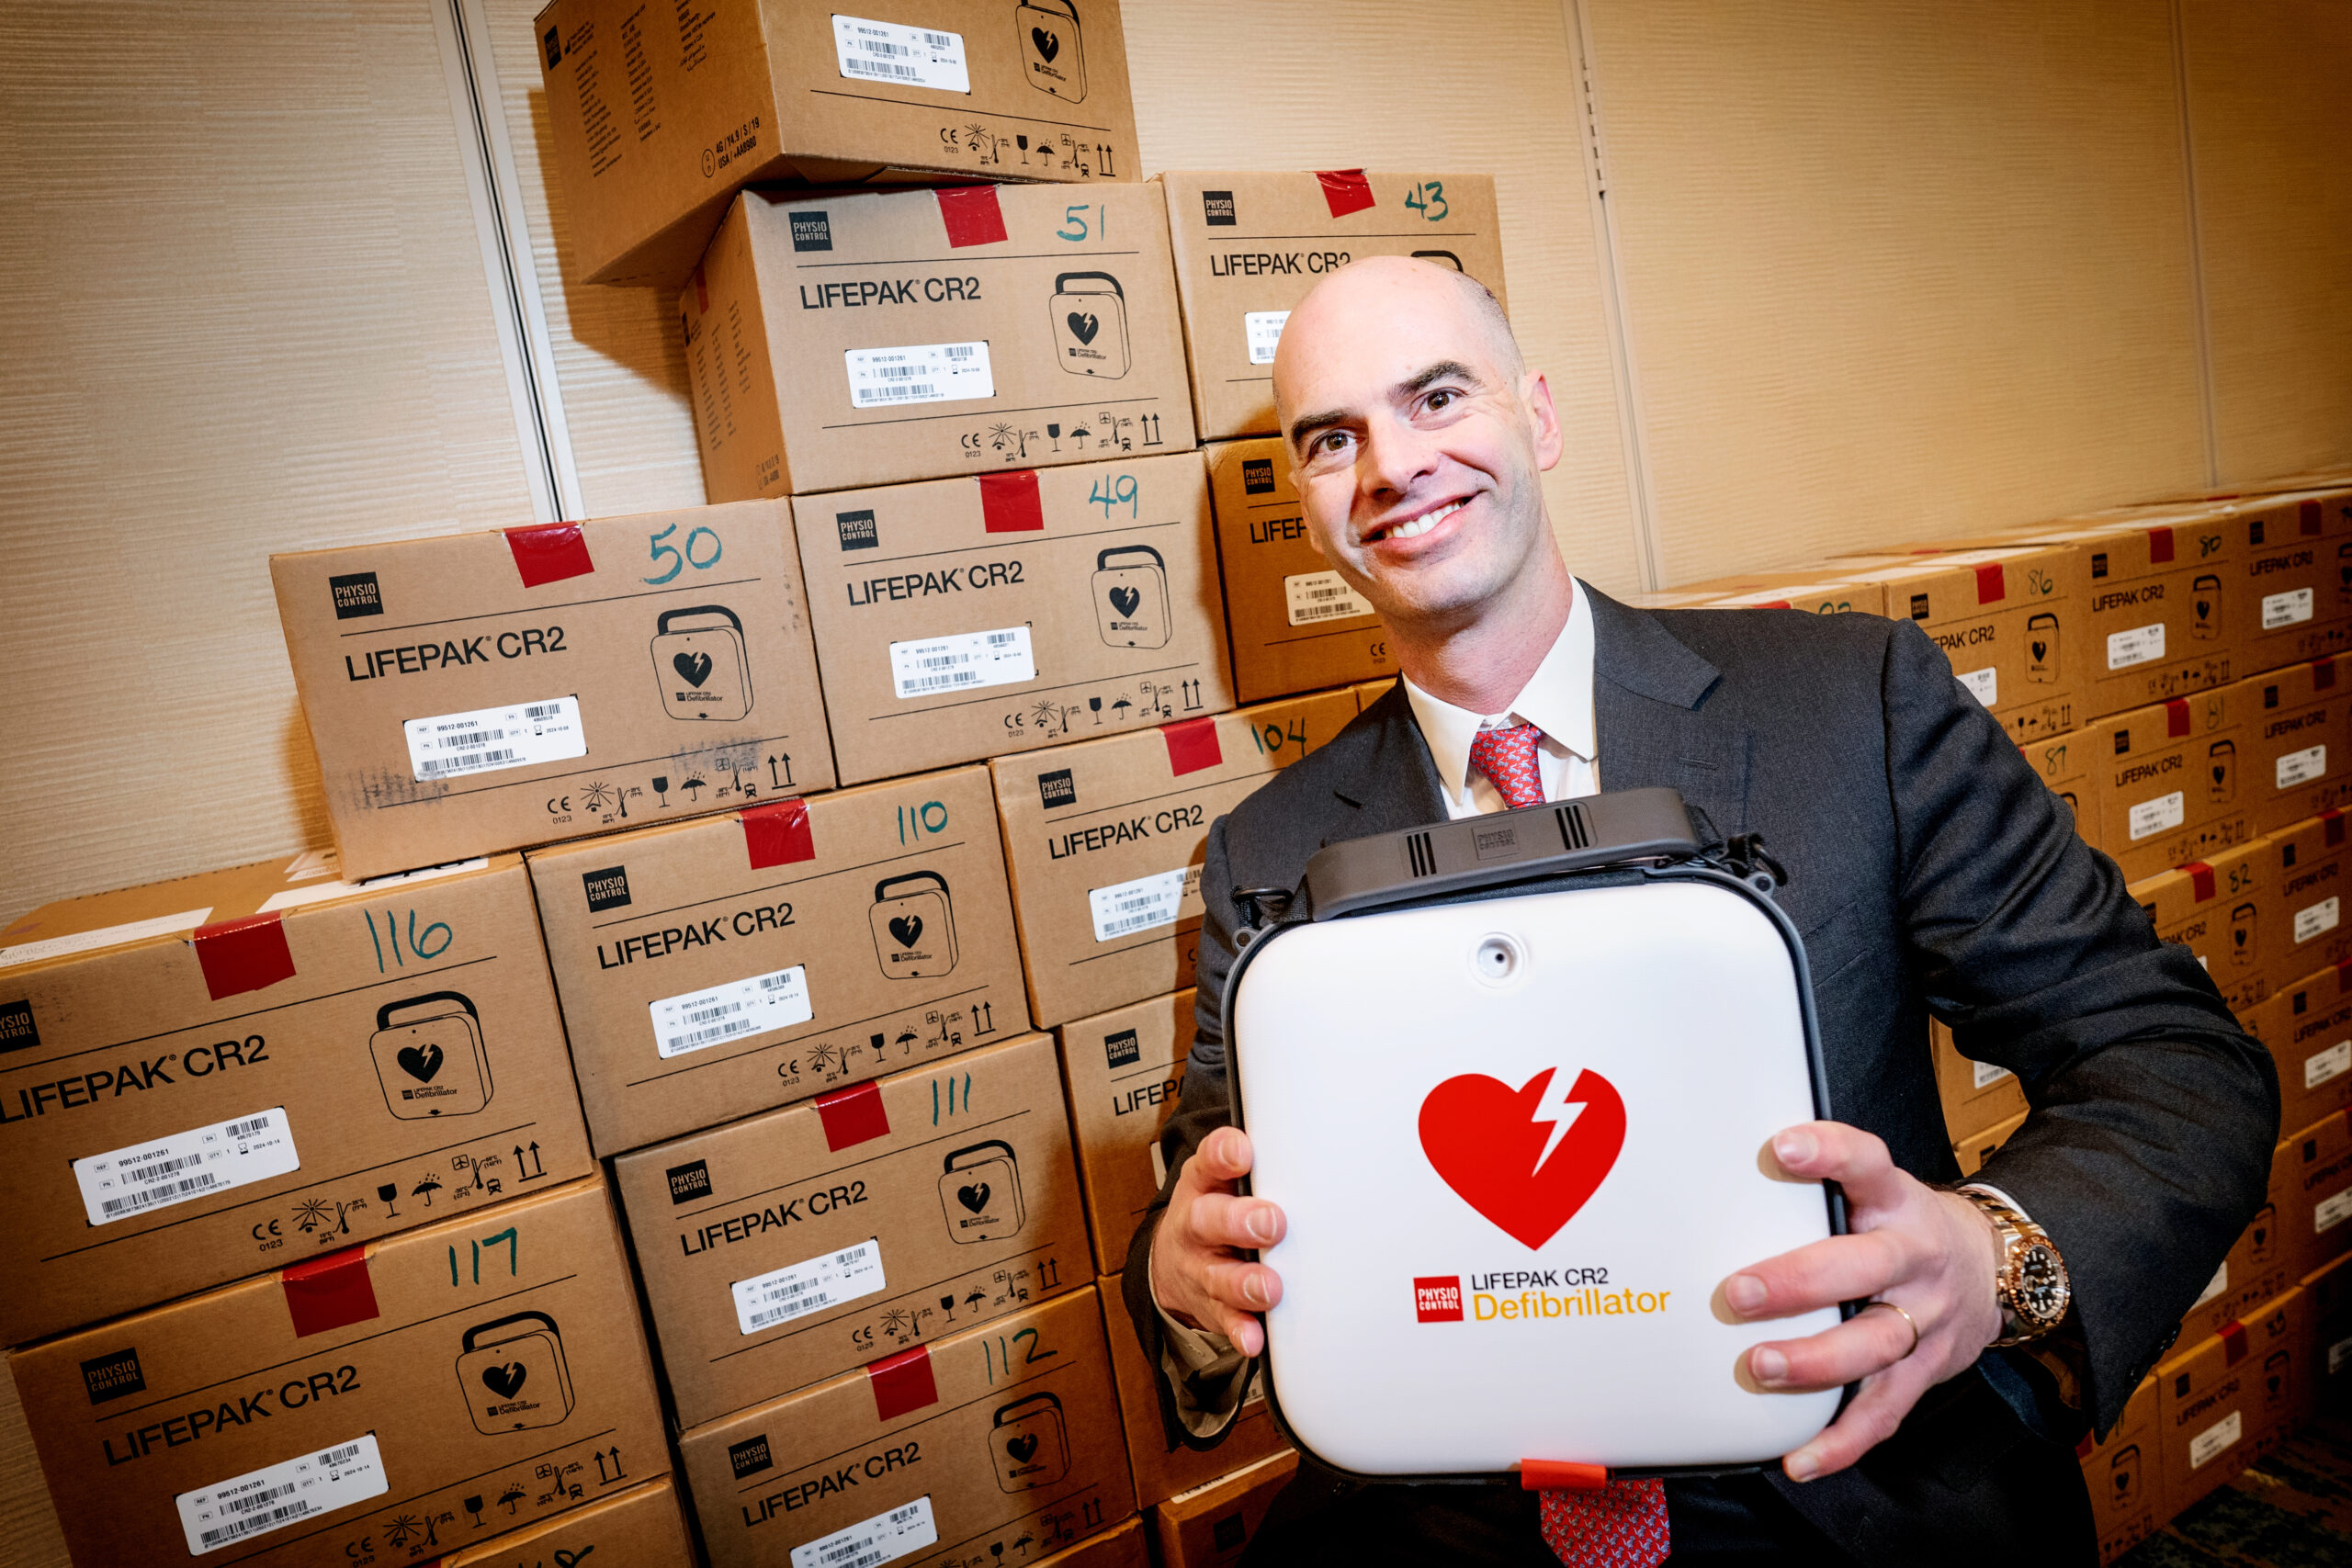 The Daily Yonder Features Walter Panzirer and Helmsley AED Initiative